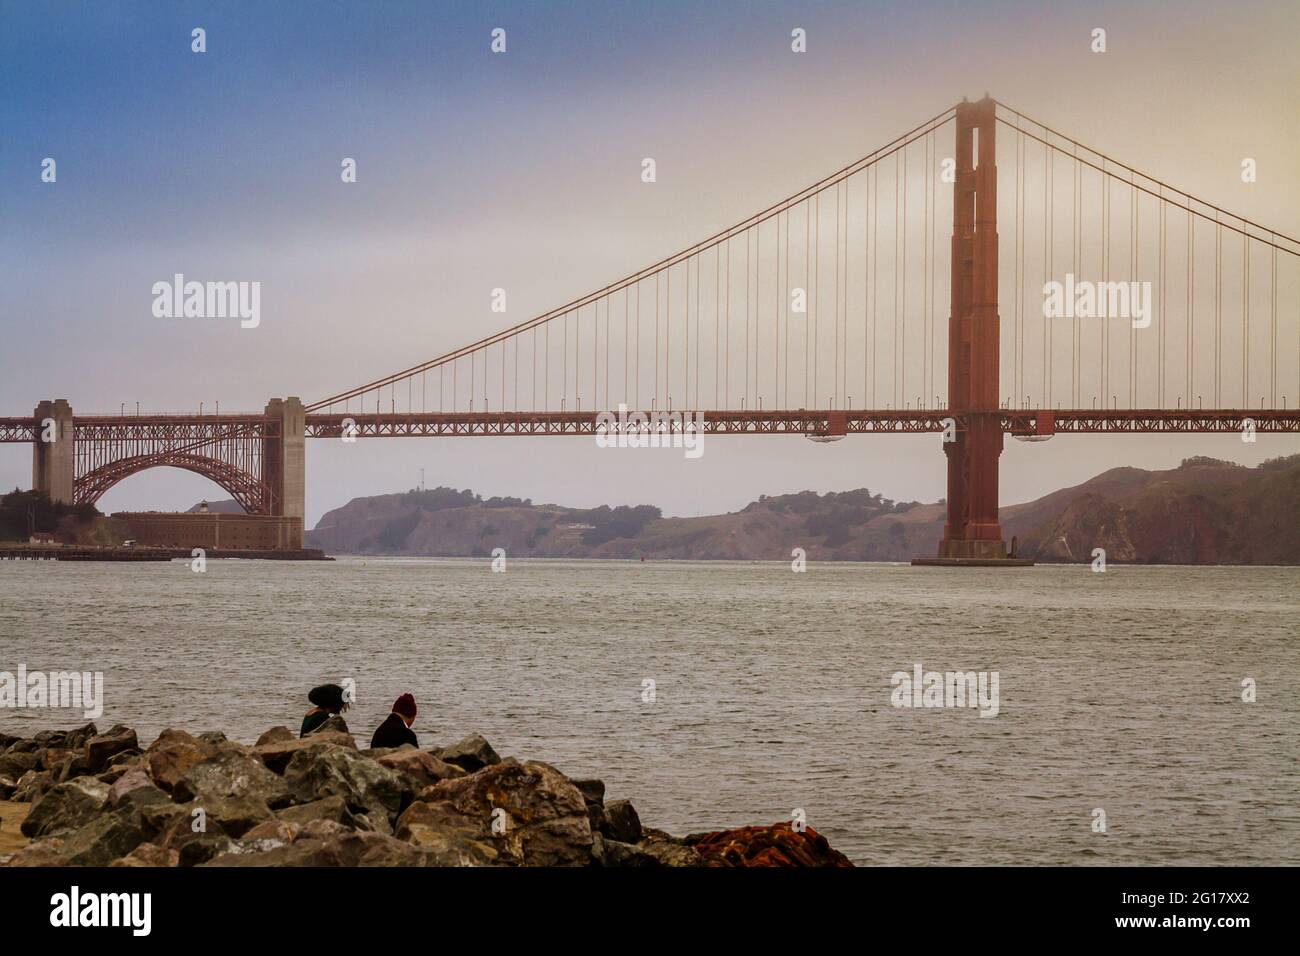 Golden Gate Bridge on a foggy day and two people sitting by San Francisco Bay Stock Photo